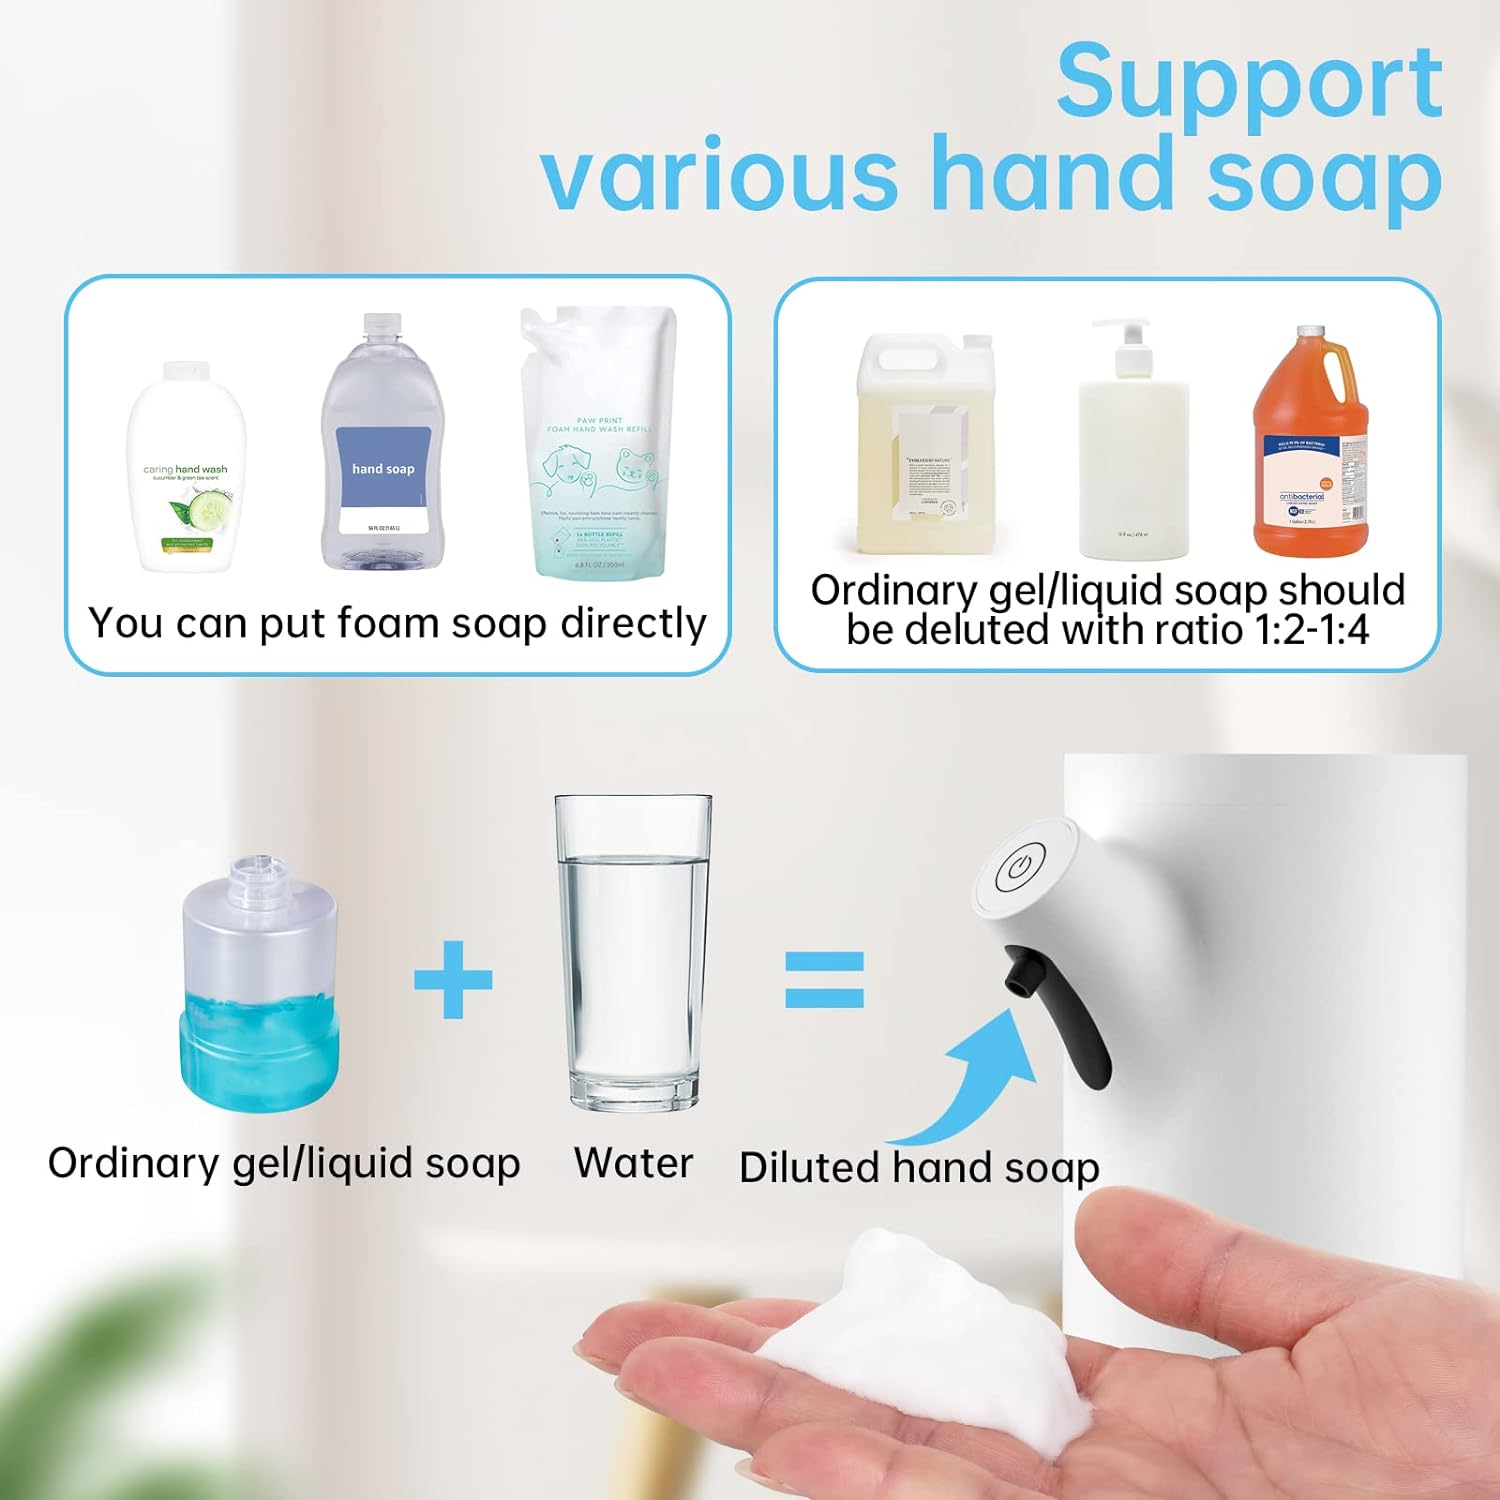 Automatic Soap Dispenser-Touchless & Rechargeable, Infrared Sensor, Adjustable Foaming Liquid Soap Dispenser Use for Kitchen Bathroom Home Office School, Countertop Soap Dispenser